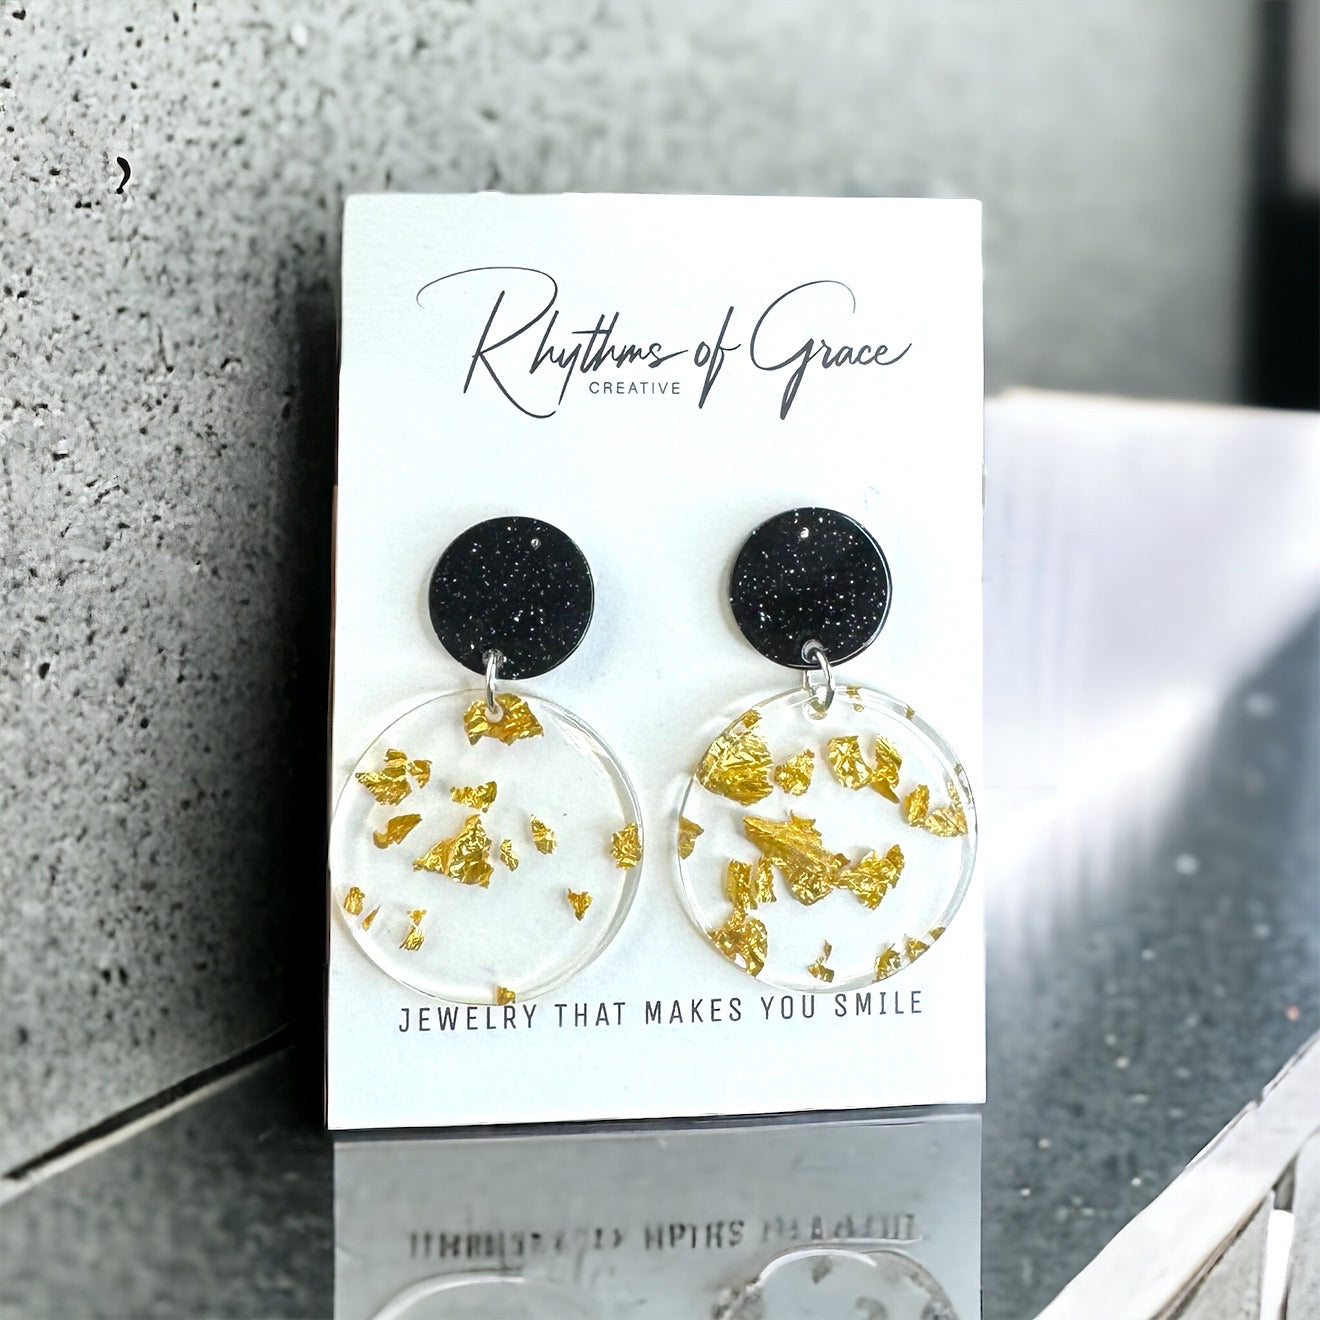 Elegant Gold and Black Acrylic Earrings with Gold Leaf Flecks - Stainless Steel Posts